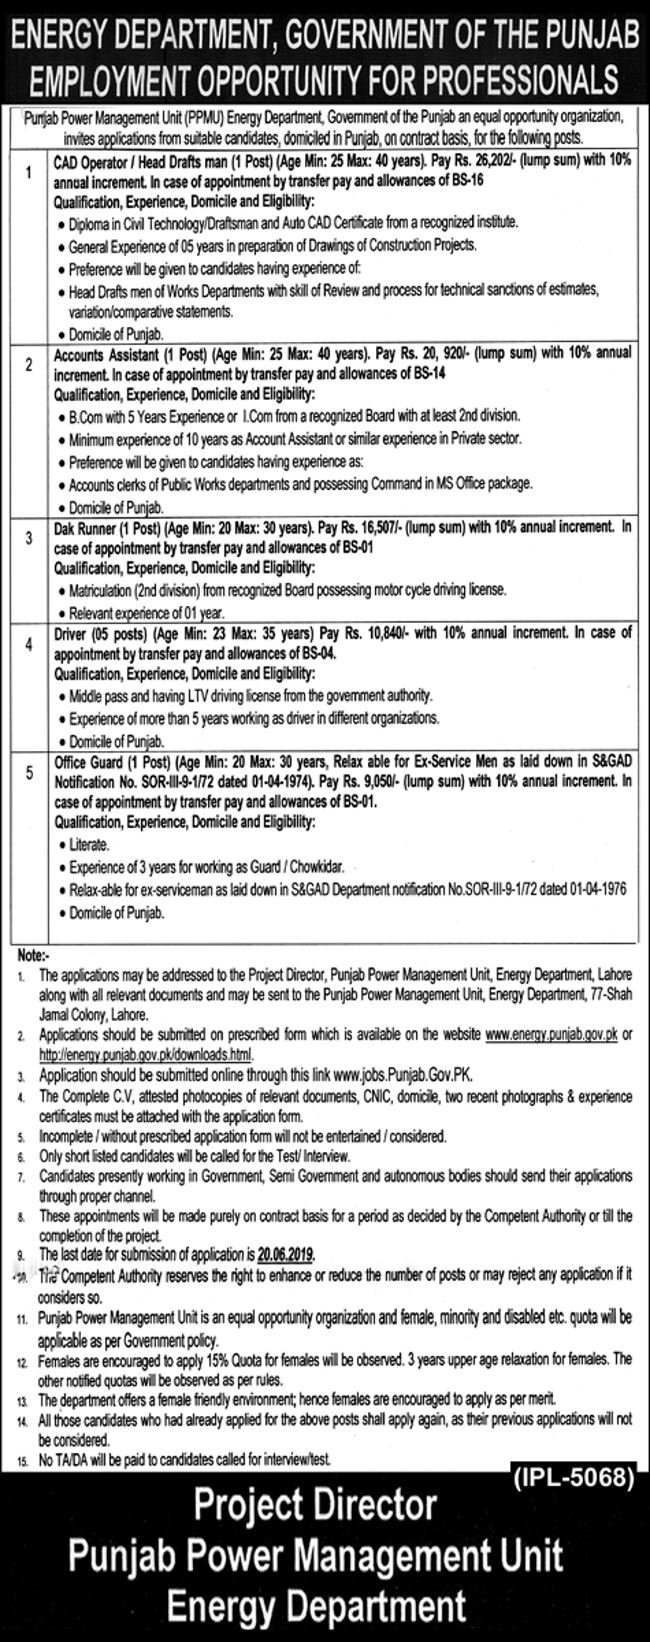 Energy Department Punjab Jobs 2019 for 9+ CAD Operator, Dak Runner, Accounts, Drivers & Support Staff